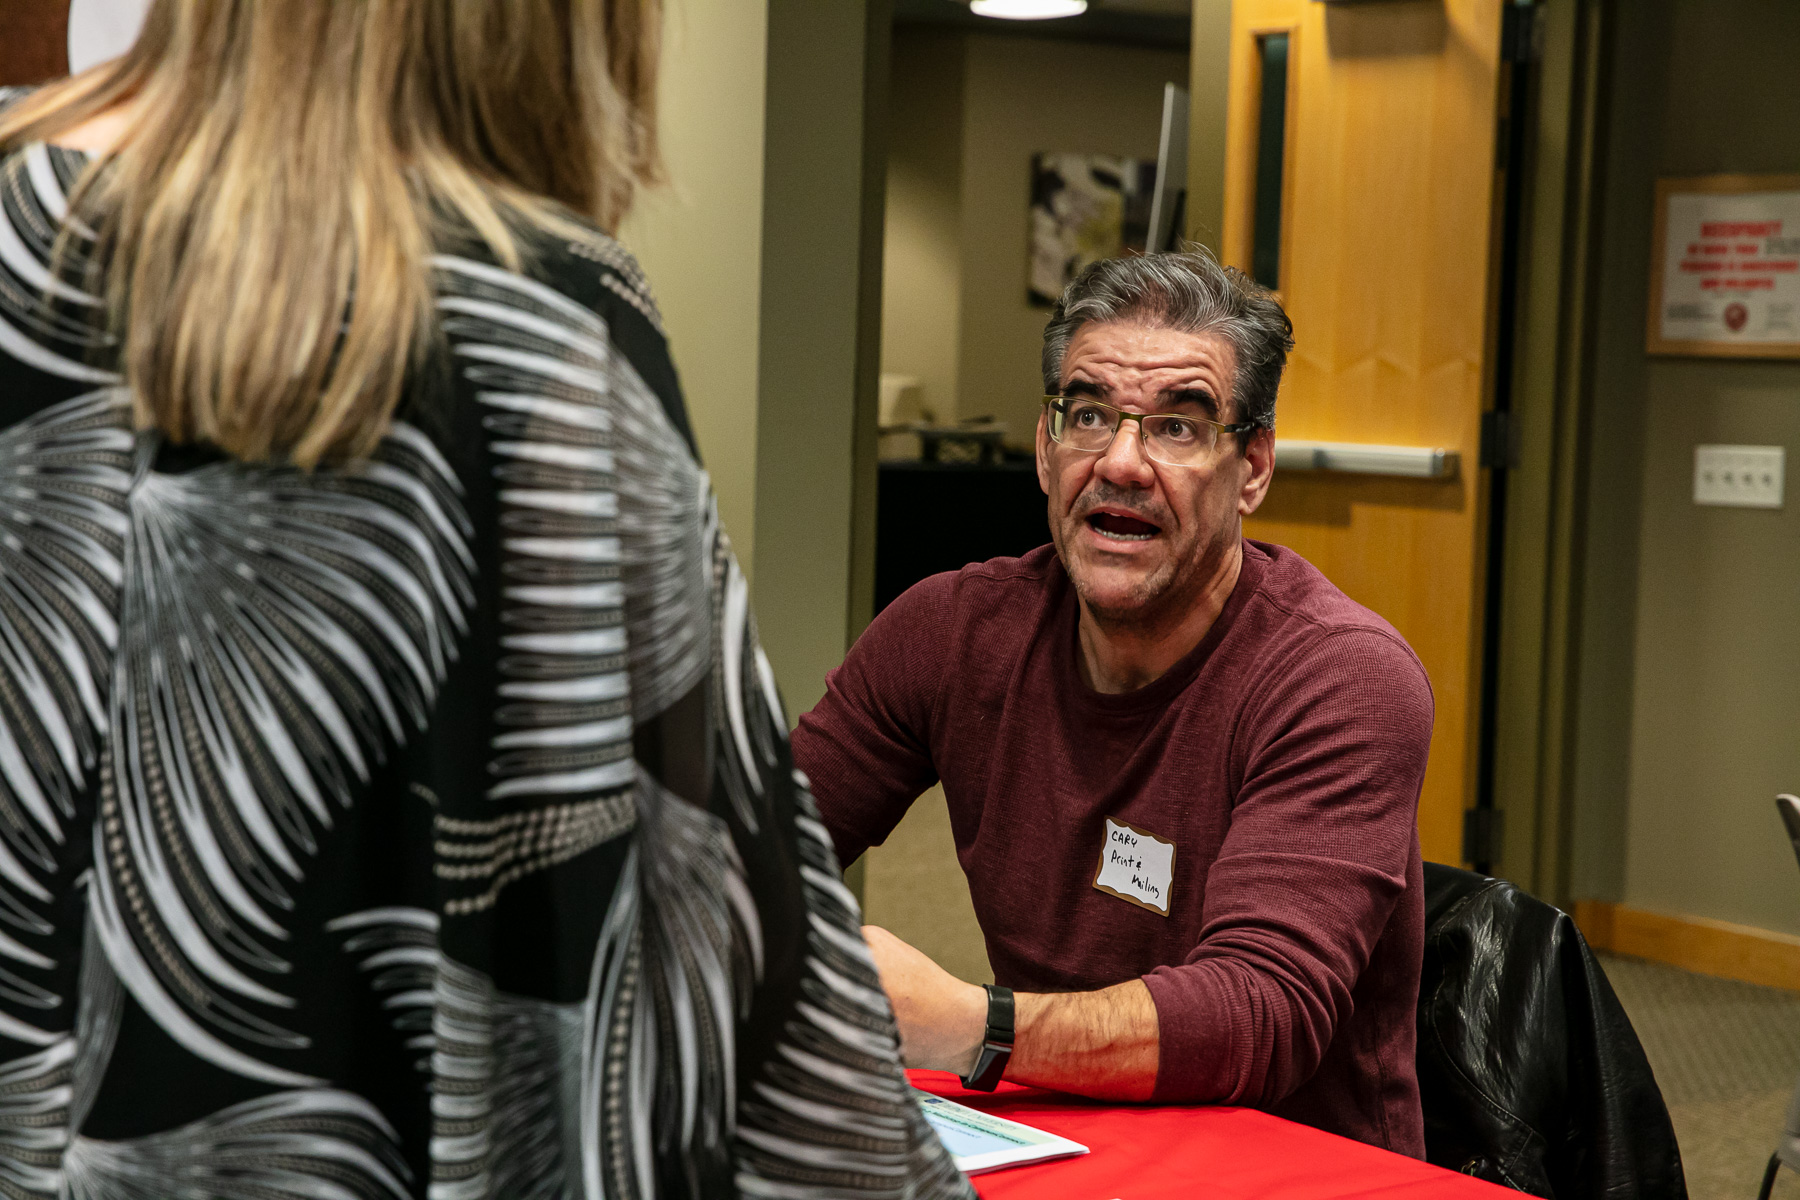 Department represetatives were present in providing information for services like print and mailing resources that adjunct faculty can utilize for their applicable course needs. (DePaul University/Randall Spriggs)